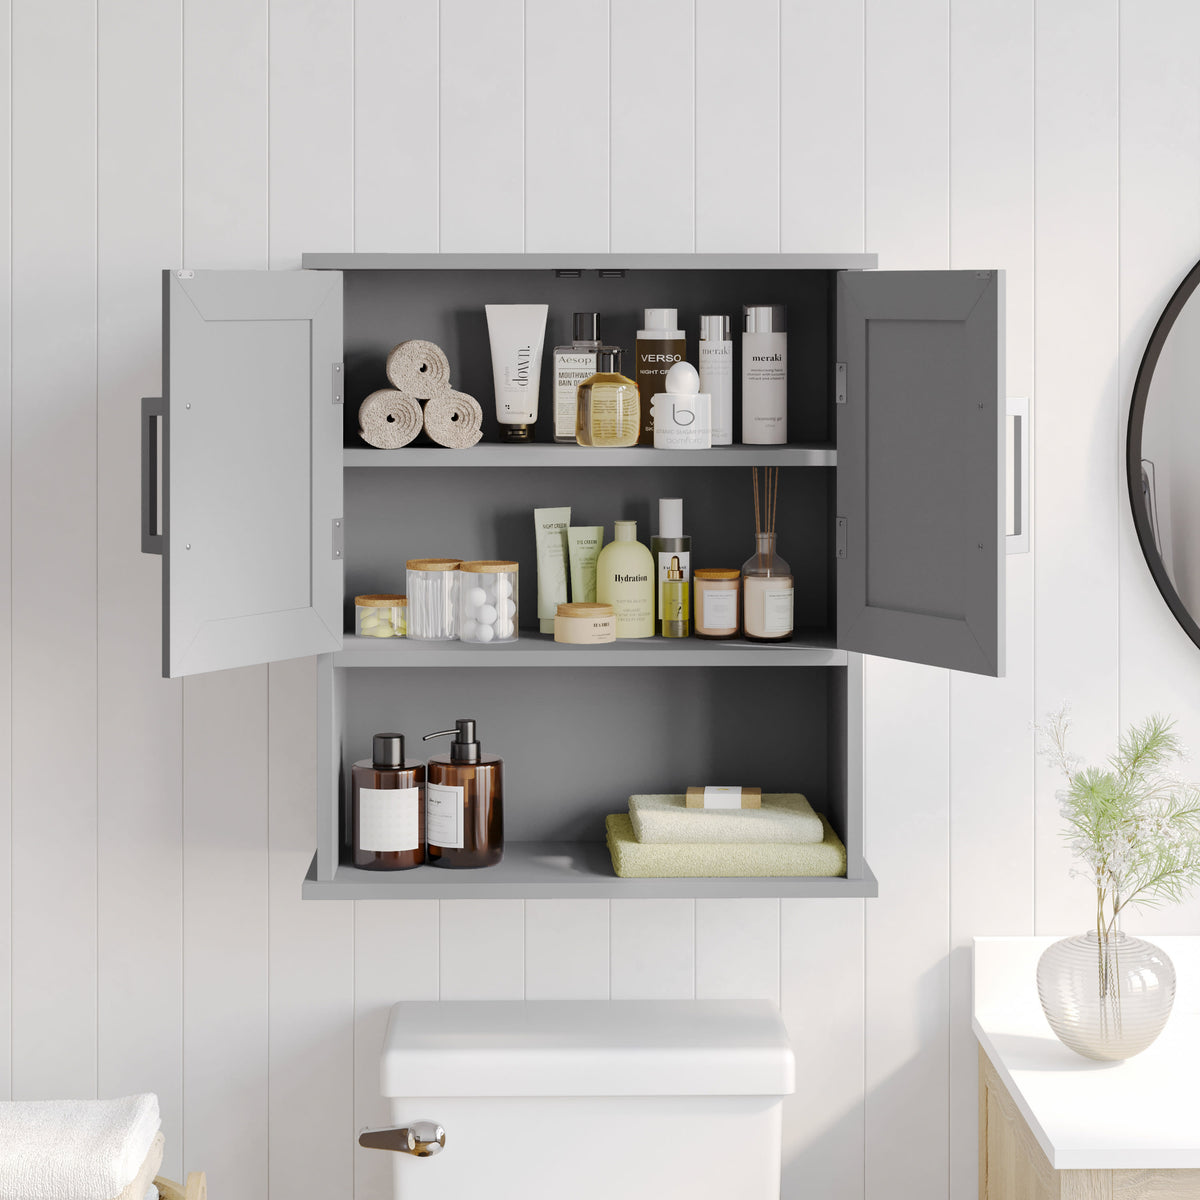 Gray |#| Modern Bathroom Wall Mount Medicine Cabinet with Magnetic Close Doors in Gray